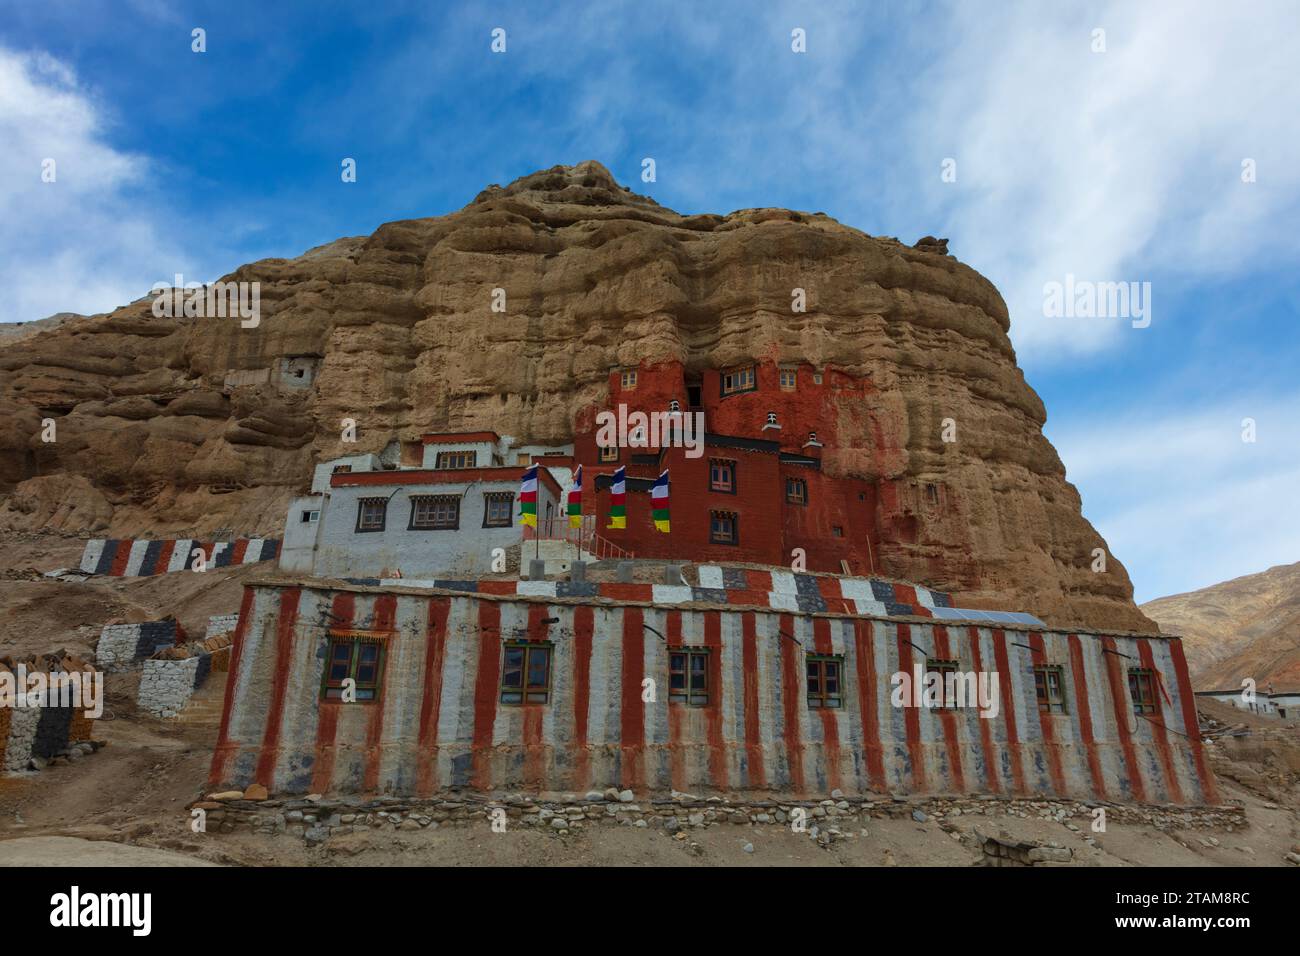 The village and caves of Thinggor just north of Lo Manthang, the capital of Mustang District, Nepal Stock Photo